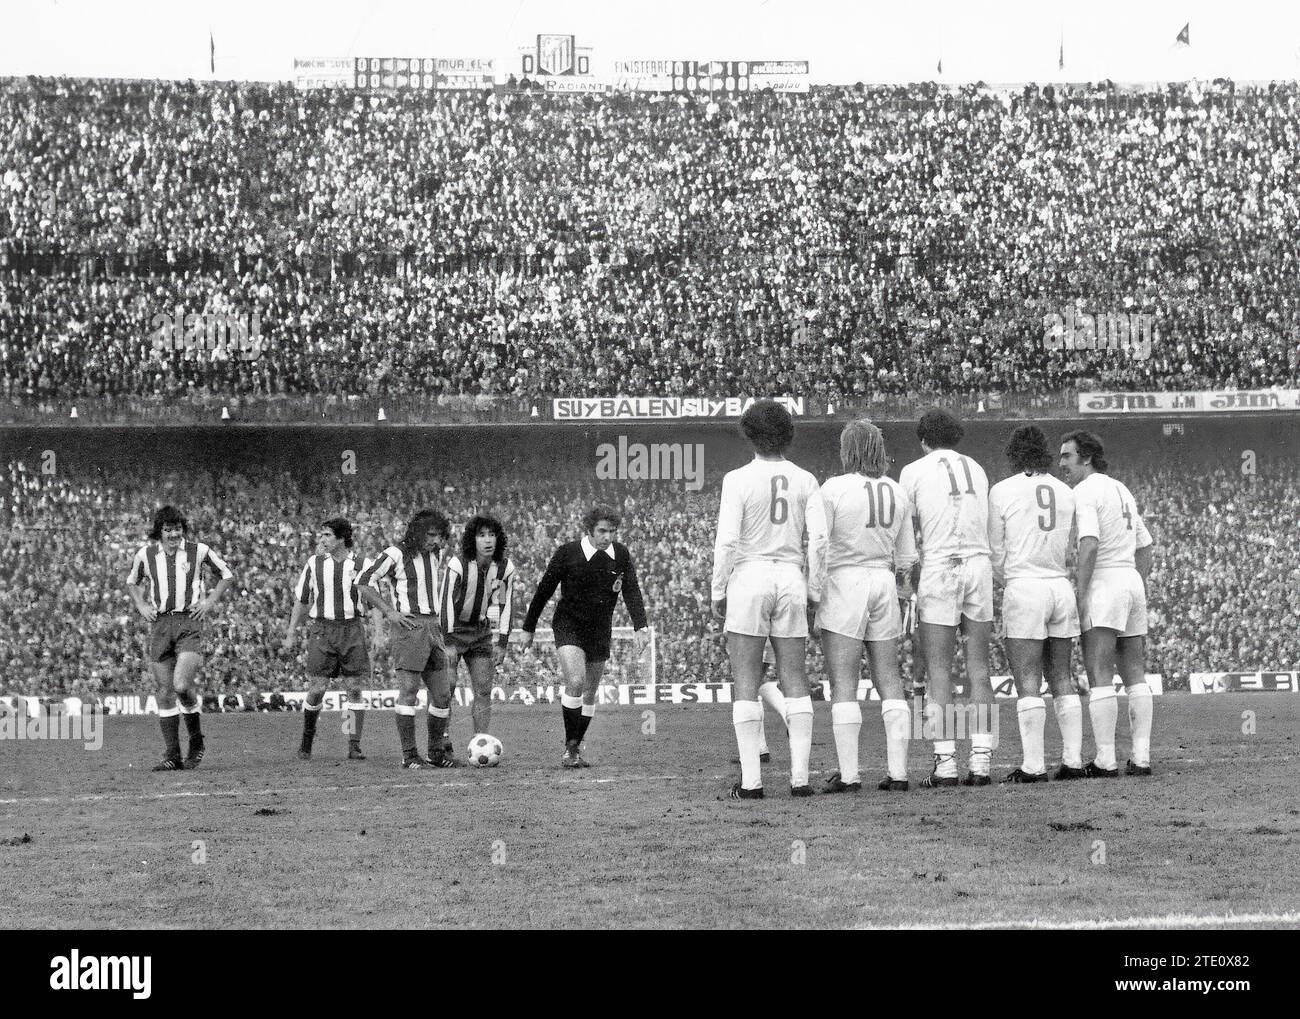 Madrid. 01/11/1976. League match between Atlético de Madrid and Real Madrid at the Vicente Calderón stadium, which ended with the result of 1 to 0. In the image a free kick with: Ayala and Rubén Cano in front of the ball, Leal and Alberto behind; opposite, del Bosque, Netzer, Roberto Martínez, Santillana and Pirri. Credit: Album / Archivo ABC / Teodoro Naranjo Domínguez Stock Photo